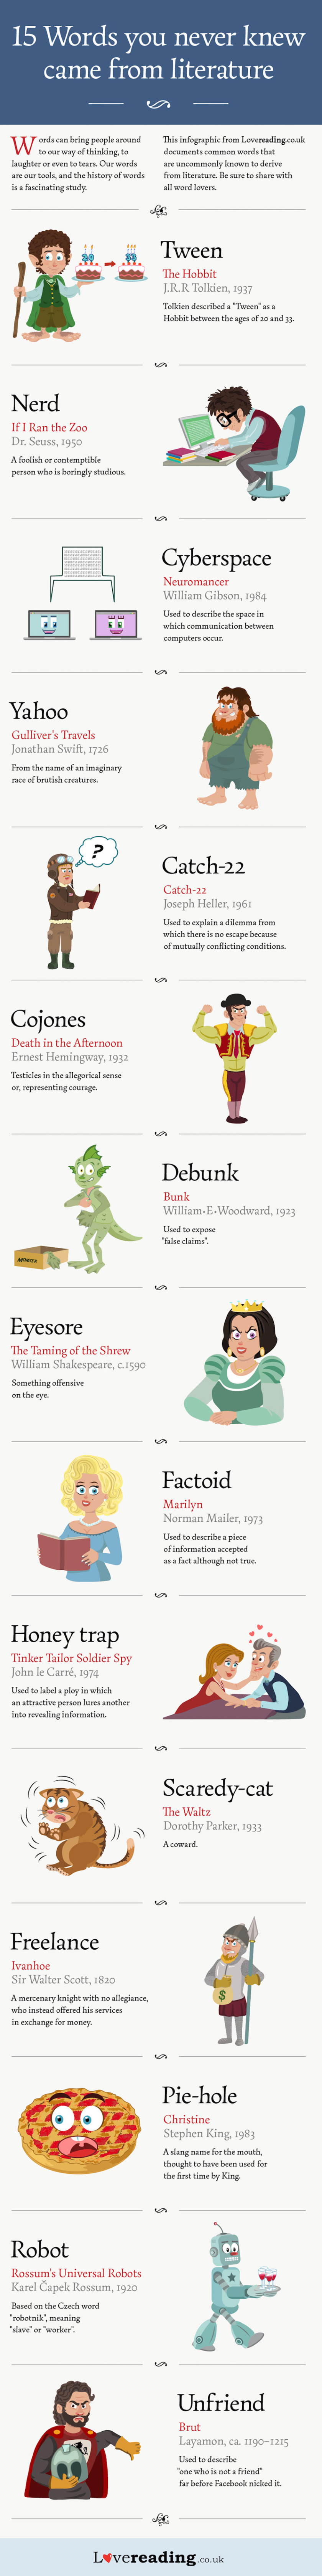 15 words you never knew came from literature - infographic